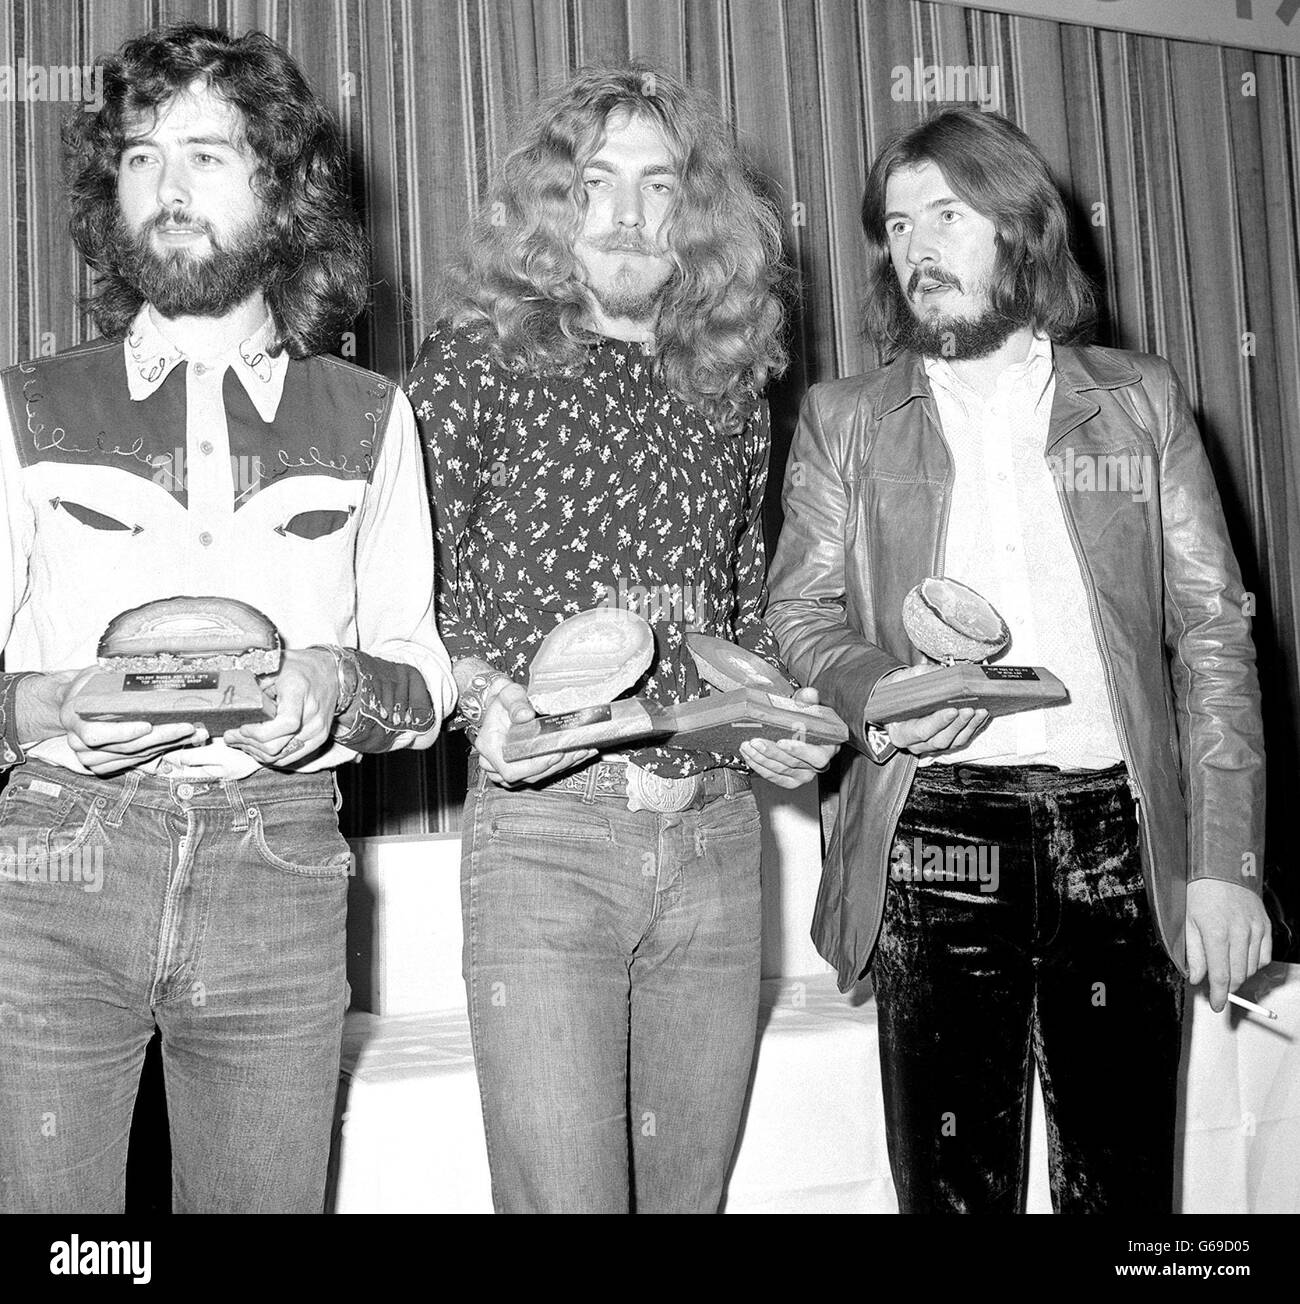 Members of Led Zeppelin (l-r) Jimmy Page, Robert Plant and John Bonham after receiving their awards in the Melody Maker Pop Poll in London. 24/12/04: Led Zeppelin's Stairway to Heaven is the best rock song of all time, according to a survey published. Bohemian Rhapsody by Queen, Smoke On The Water by Deep Purple and Hotel California by The Eagles all made the top 10. But the 1971 Led Zeppelin classic polled over 70% of the vote in the survey by radio station Planet Rock. The song was never even released as a single but has been covered by everyone from Rolf Harris to Dolly Parton. Stock Photo